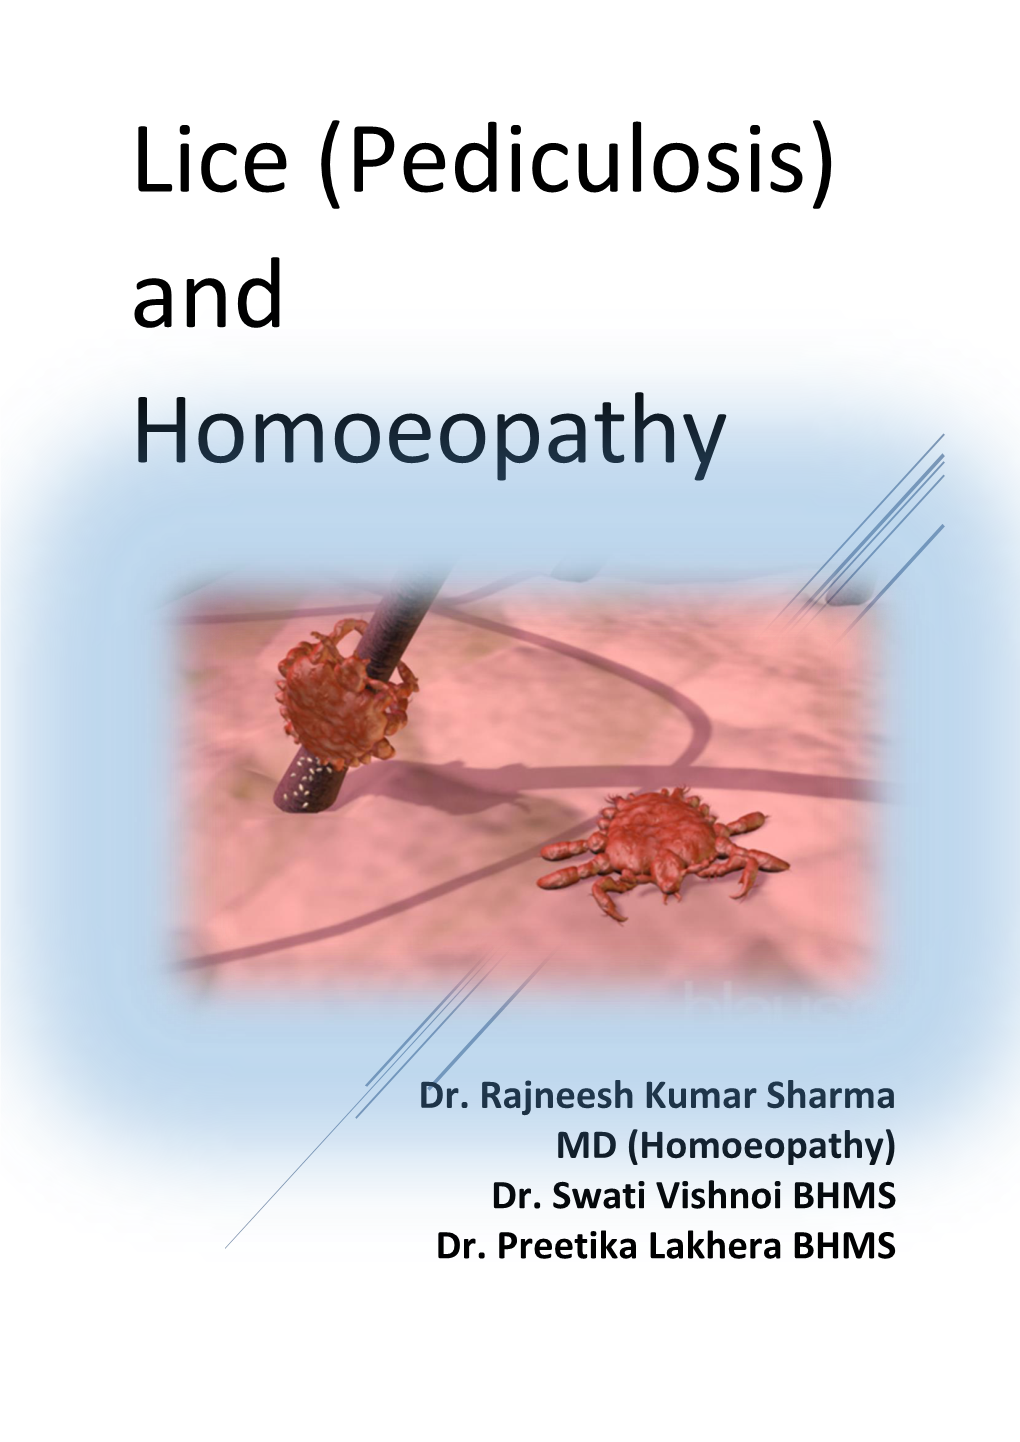 Lice (Pediculosis) and Homoeopathy